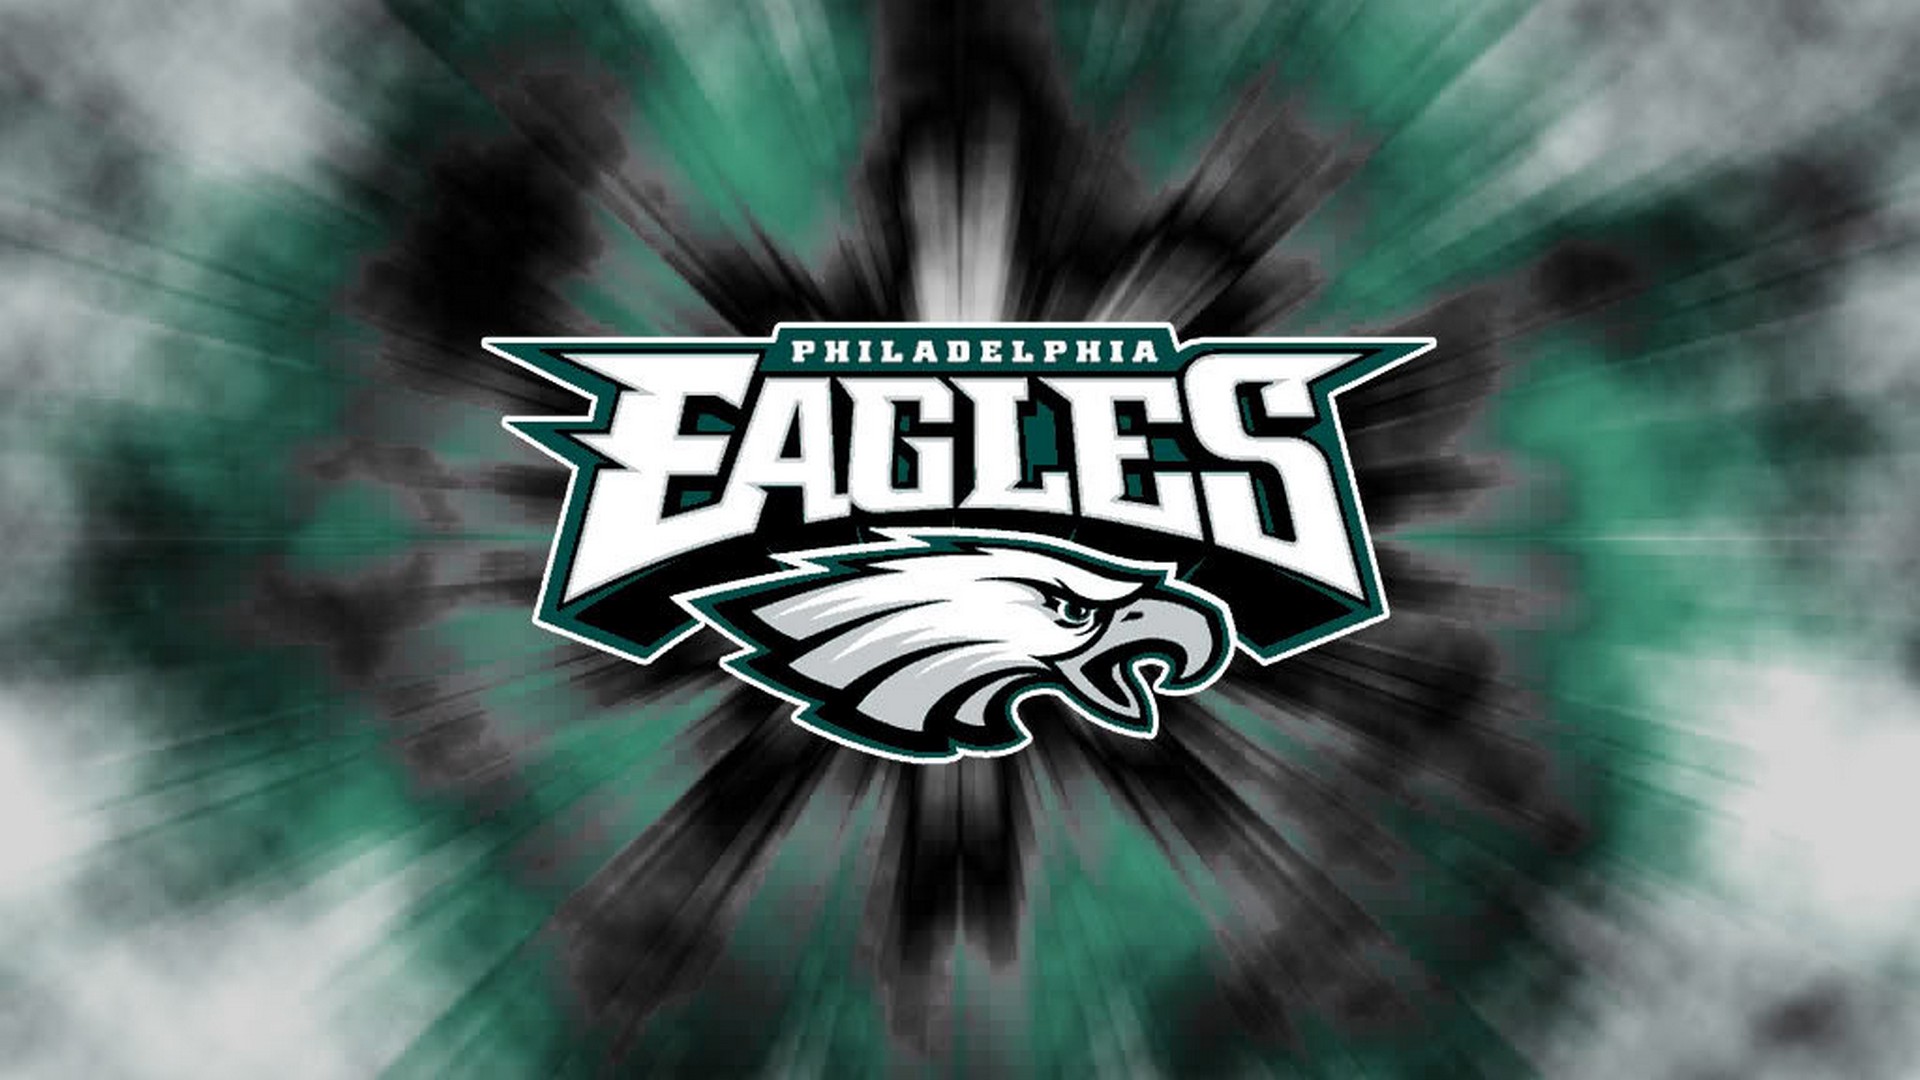 Backgrounds Phila Eagles HD with resolution 1920x1080 pixel. You can make this wallpaper for your Mac or Windows Desktop Background, iPhone, Android or Tablet and another Smartphone device